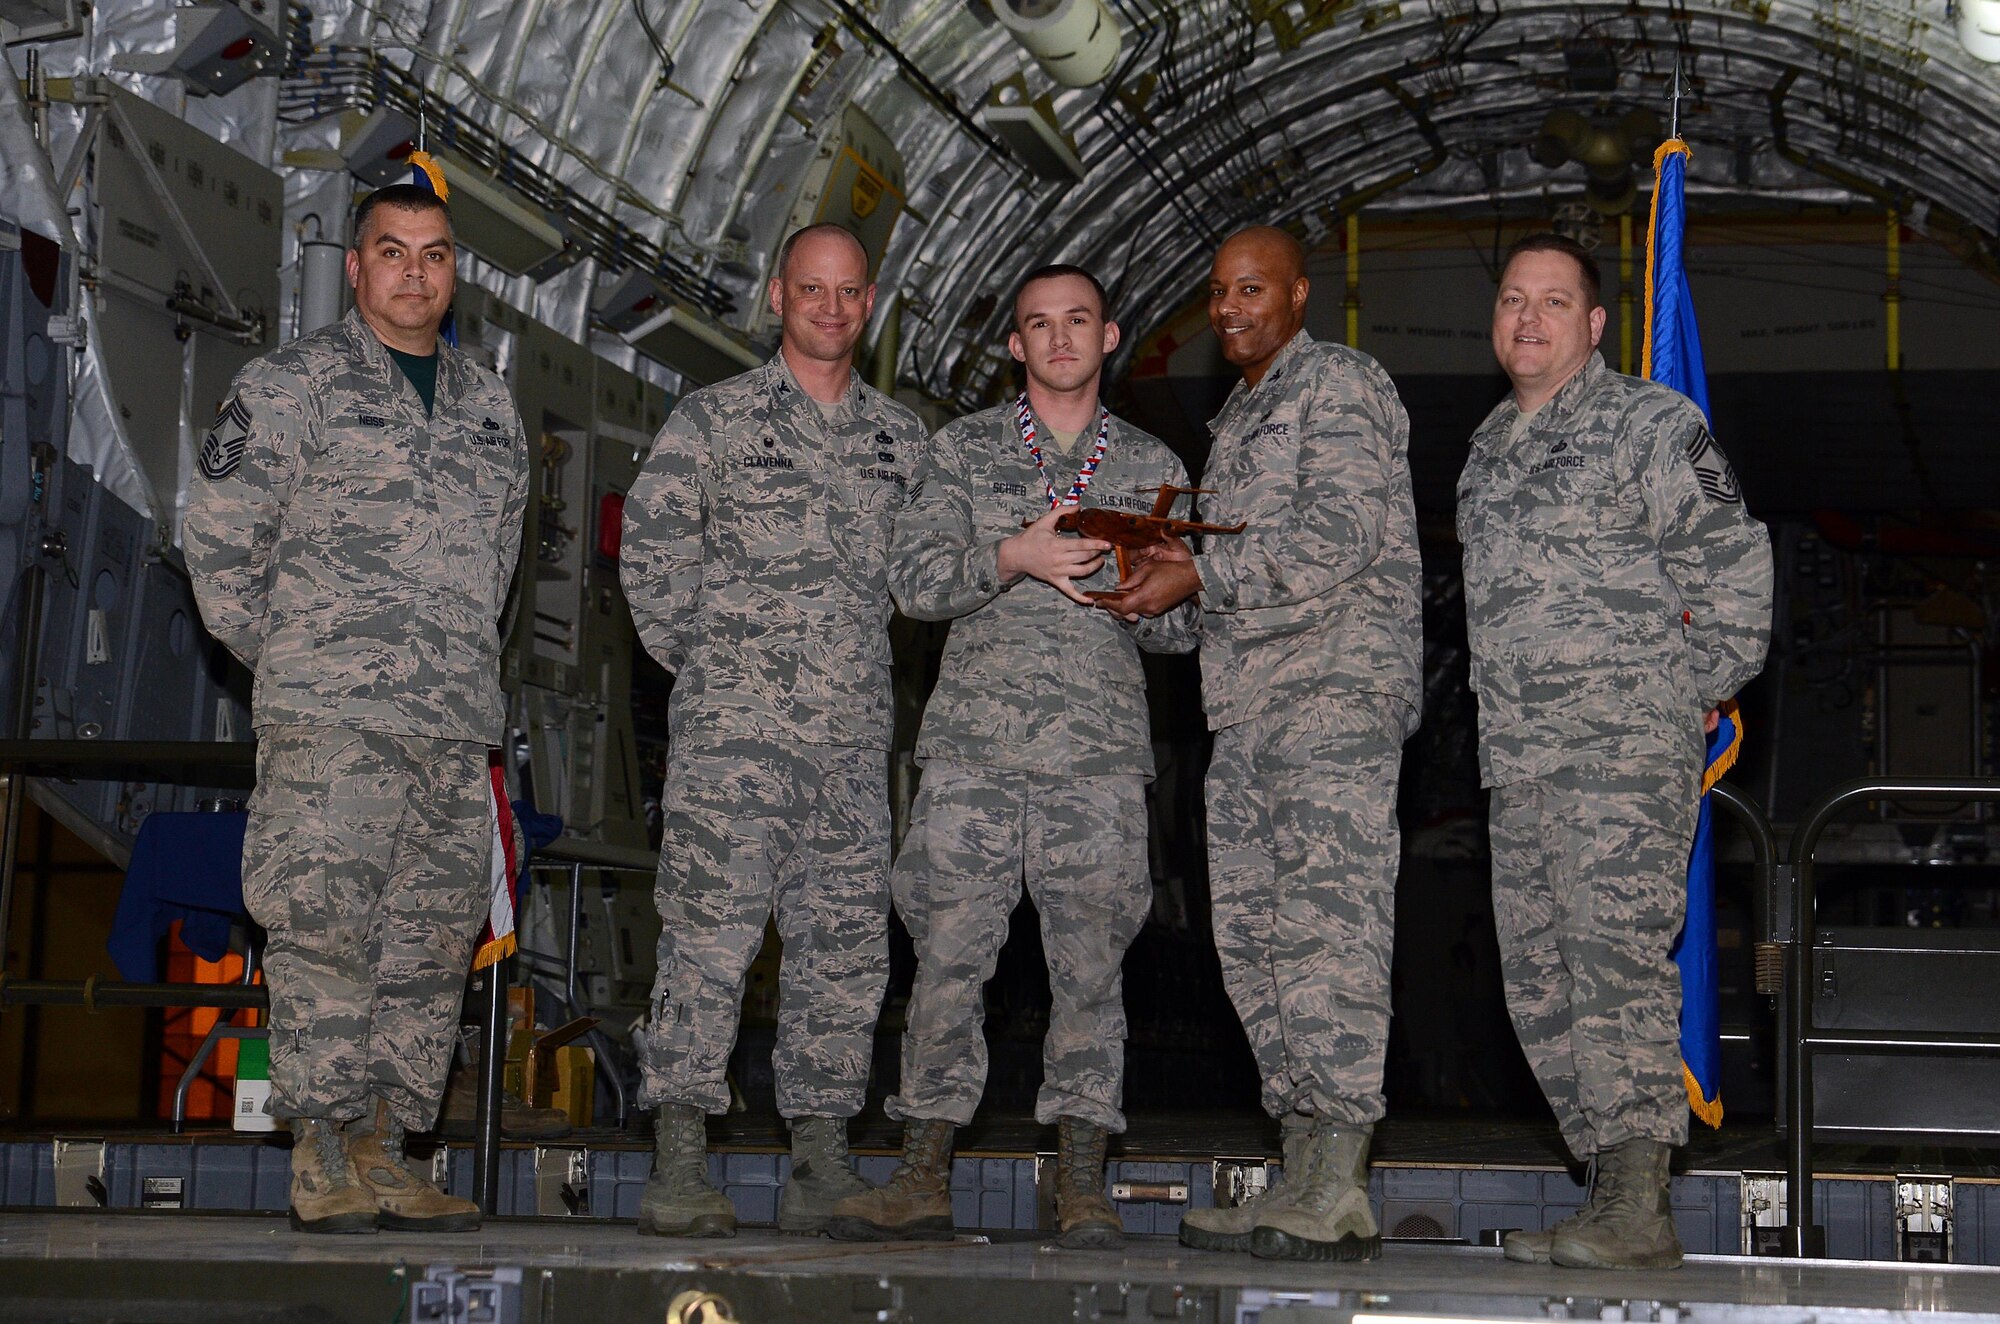 Leadership from the 62nd Maintenance Group and 627th Air Base Group award Senior Airman Matthew Schieb (center), 627th Logistics Readiness Squadron, the Top Knucklebuster award during Logfest 2017 March 24, 2017, at Joint Base Lewis-McChord, Wash. Unlike traditional award nominees, Knucklebuster nominees are nominated by their peers for work performance and overall character. (U.S. Air Force photo/Senior Airman Jacob Jimenez)  